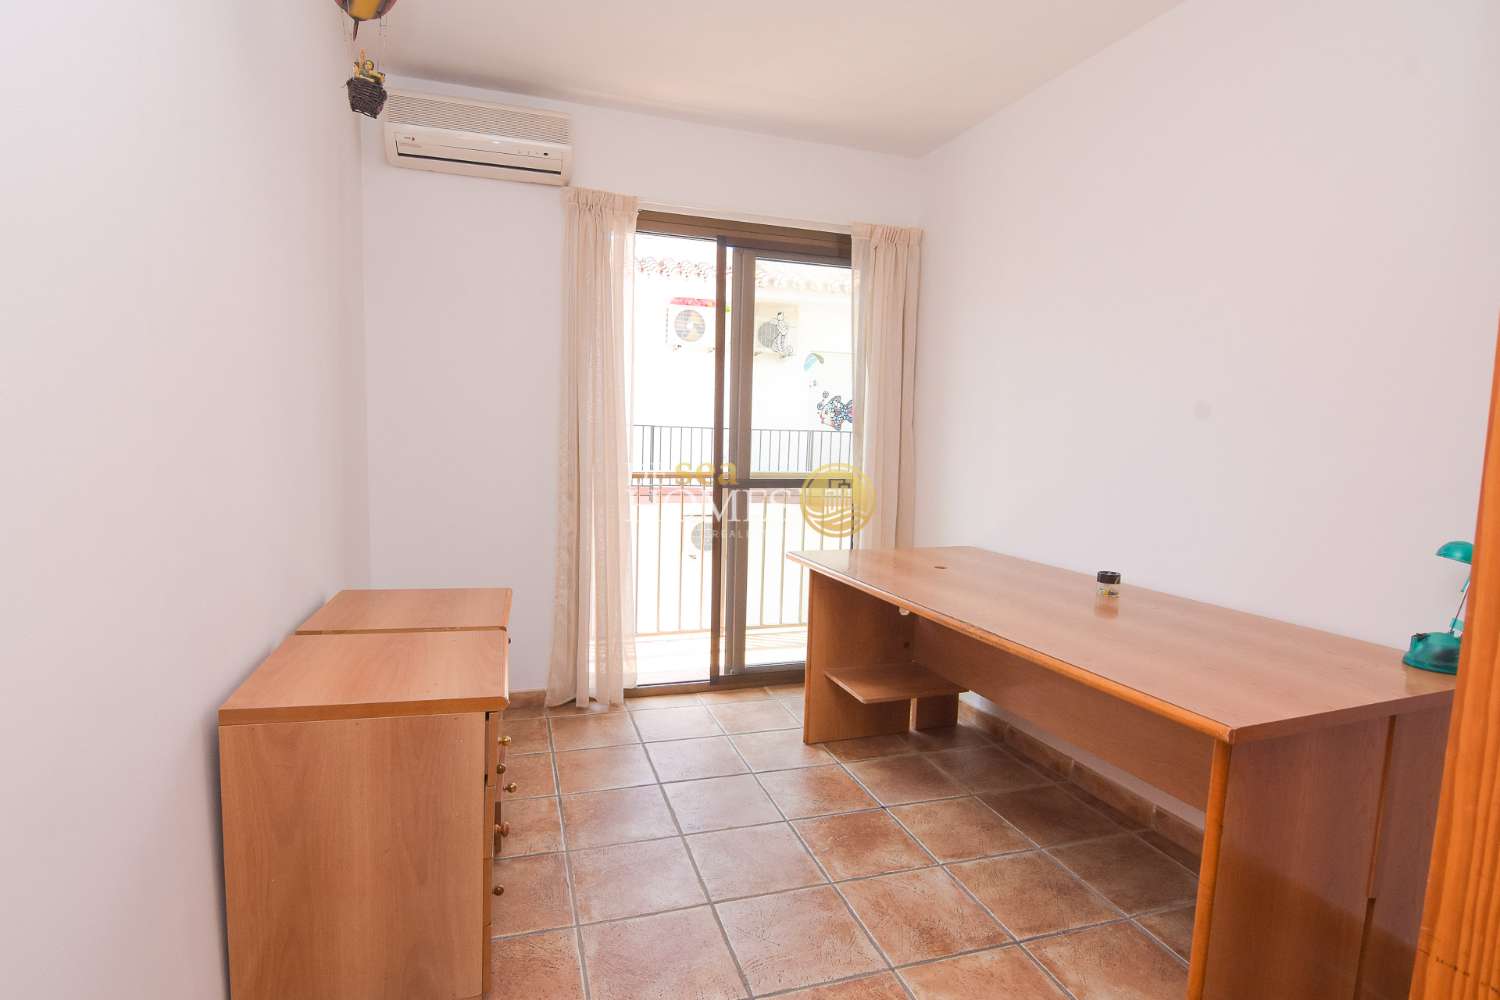 Spacious apartment with 4 bedrooms and a private terrace in the center of Nerja